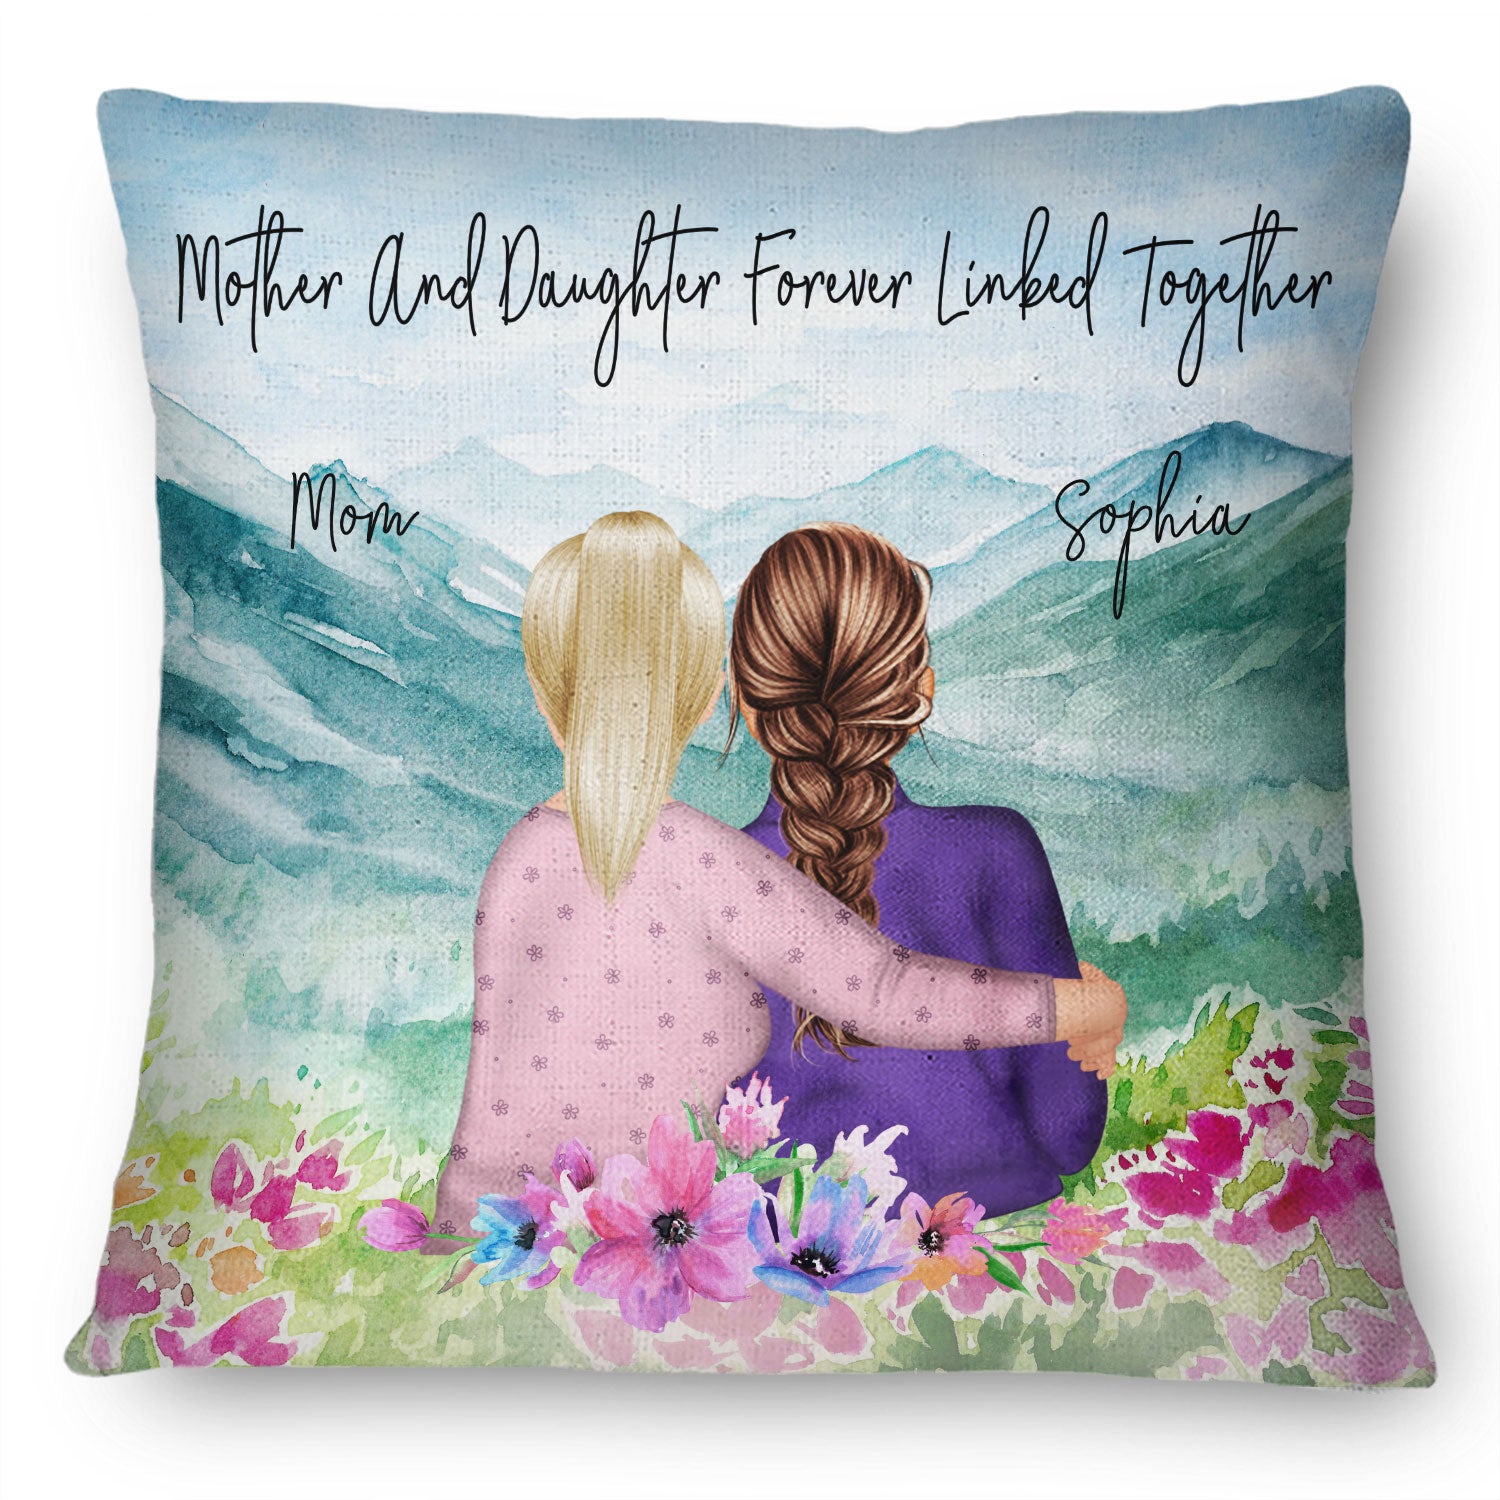 Mother & Daughter Forever Linked Together Watercolor Style - Gift For Mom, Daughter & Grandma - Personalized Custom Pillow